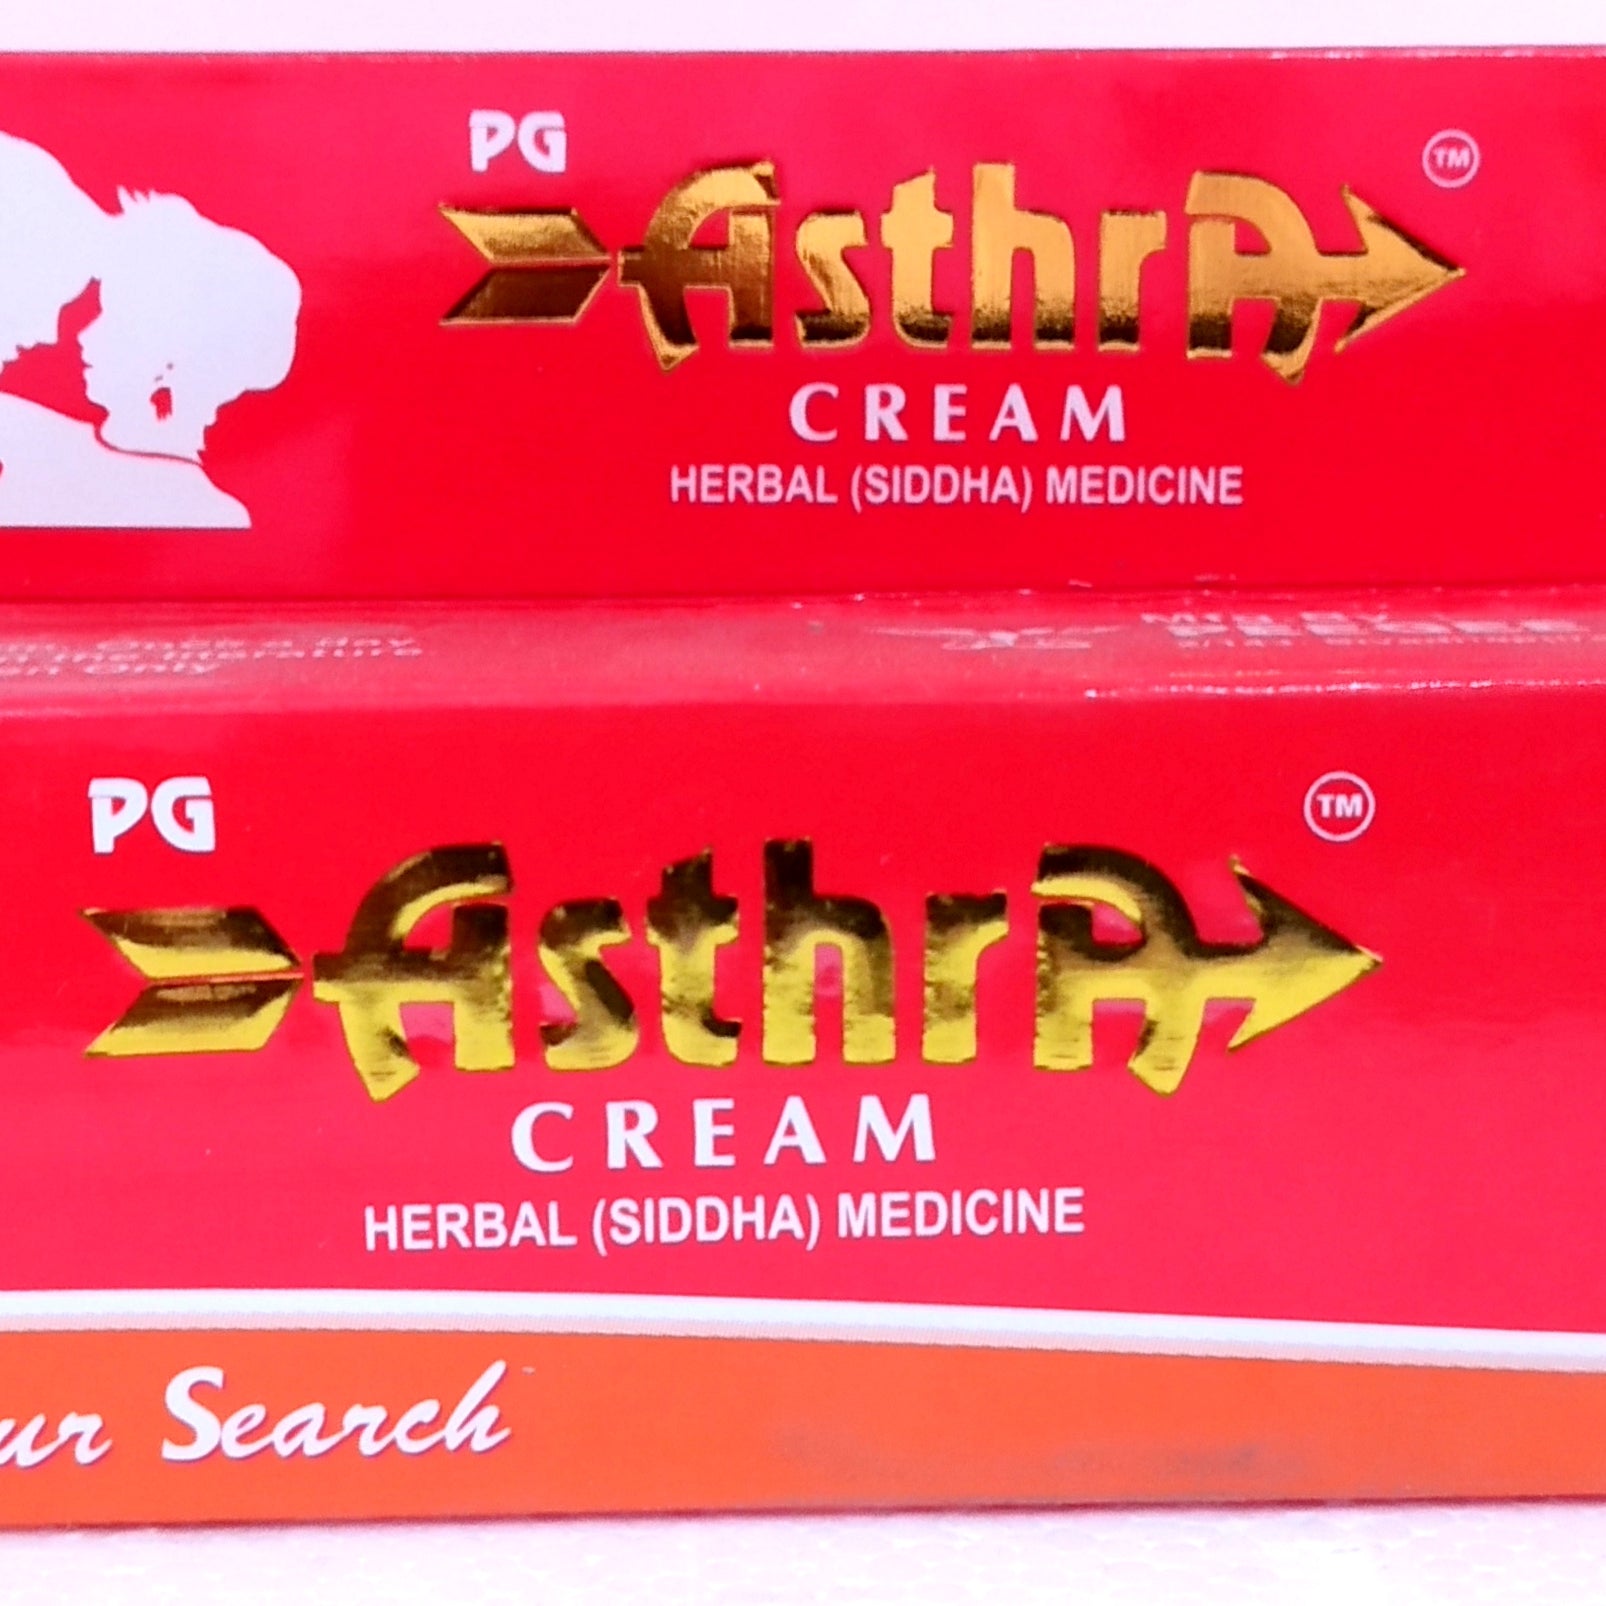 Shop Asthra Cream 15gm at price 112.00 from Peegee Online - Ayush Care